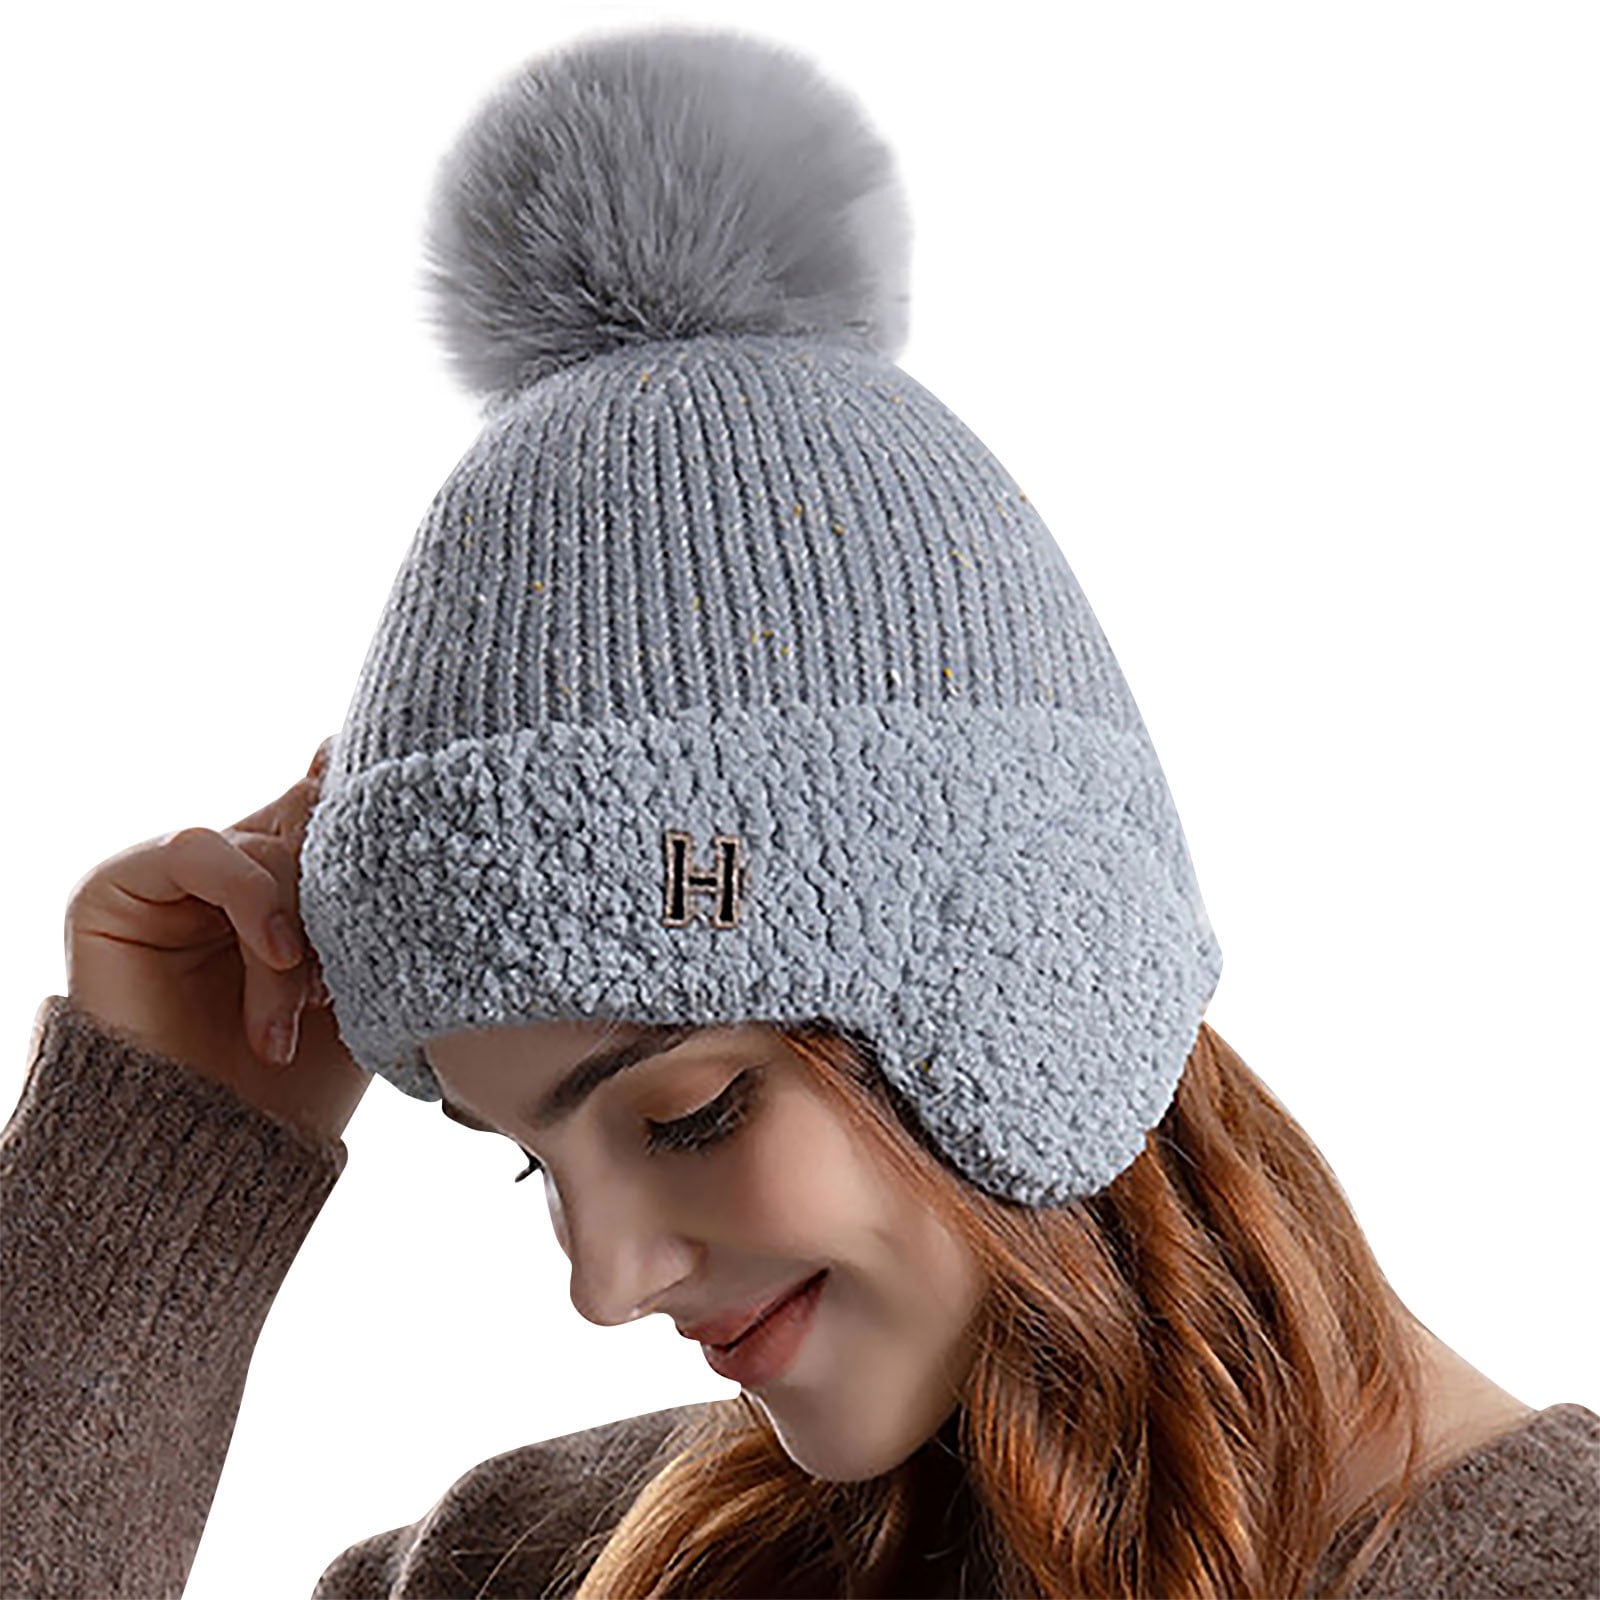 Winter Knit Hat With Ear Flaps One Size Fits All Unisex Adults & Teen.